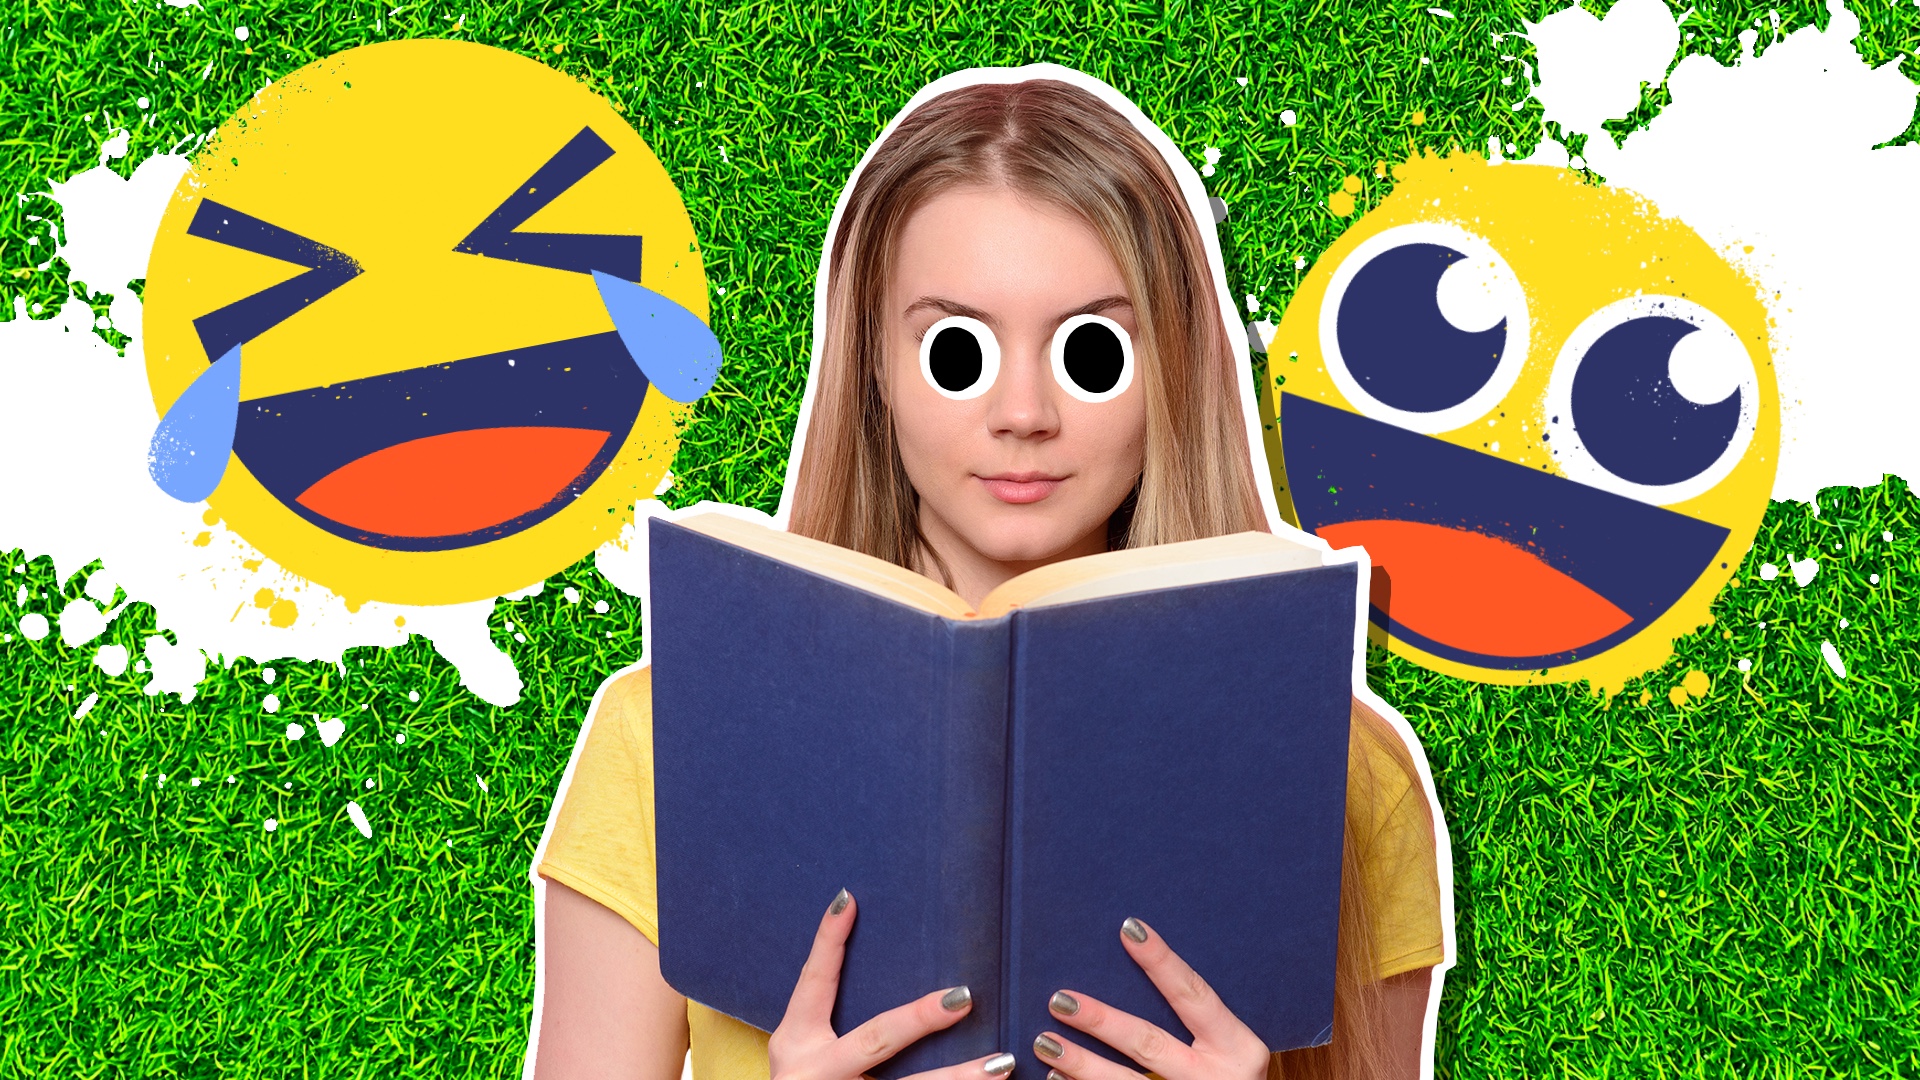 A woman reading a book surrounded by laughing emojis